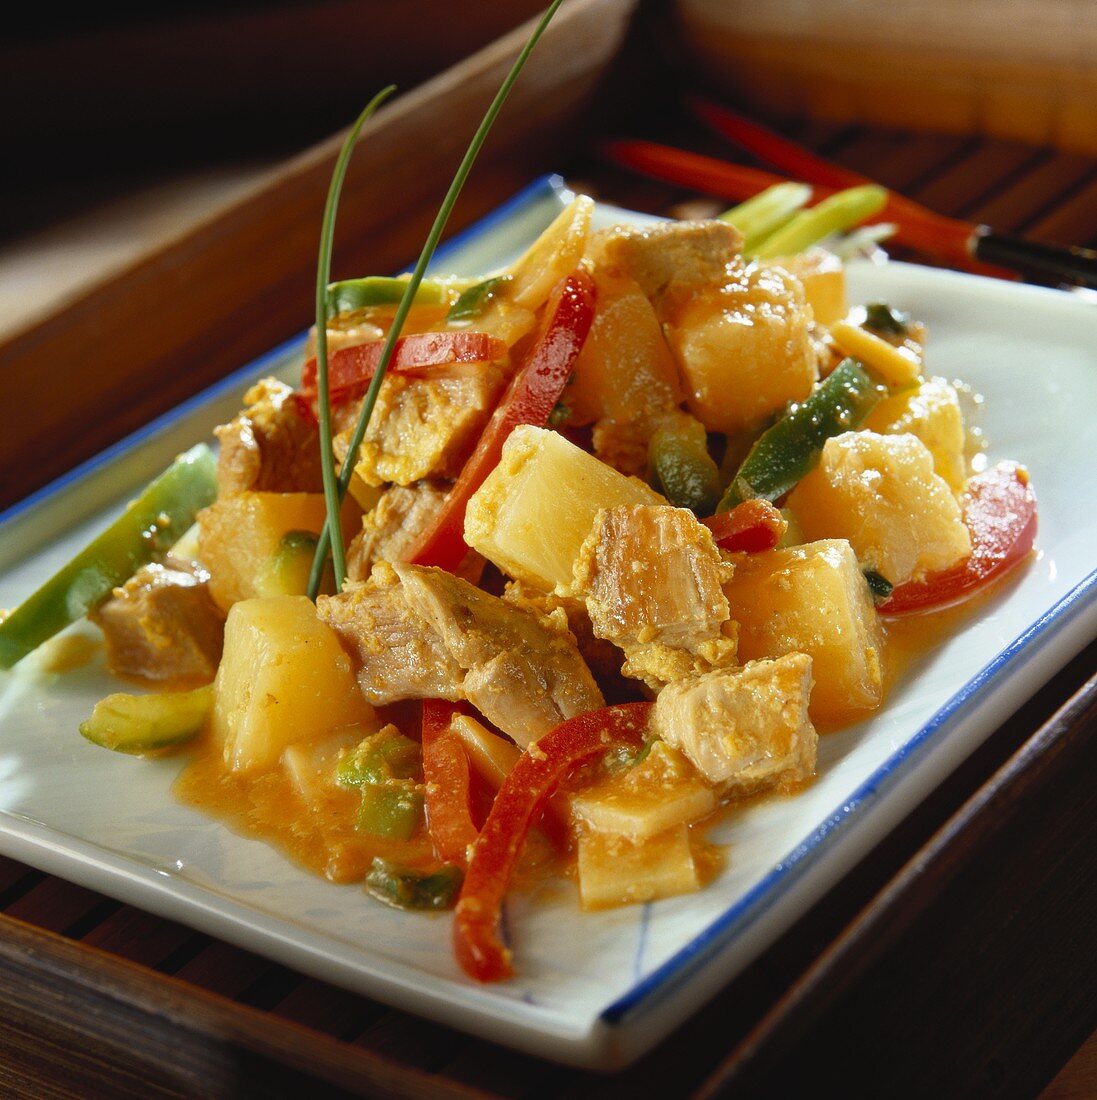 Sweet and sour pork with pineapple and strips of pepper